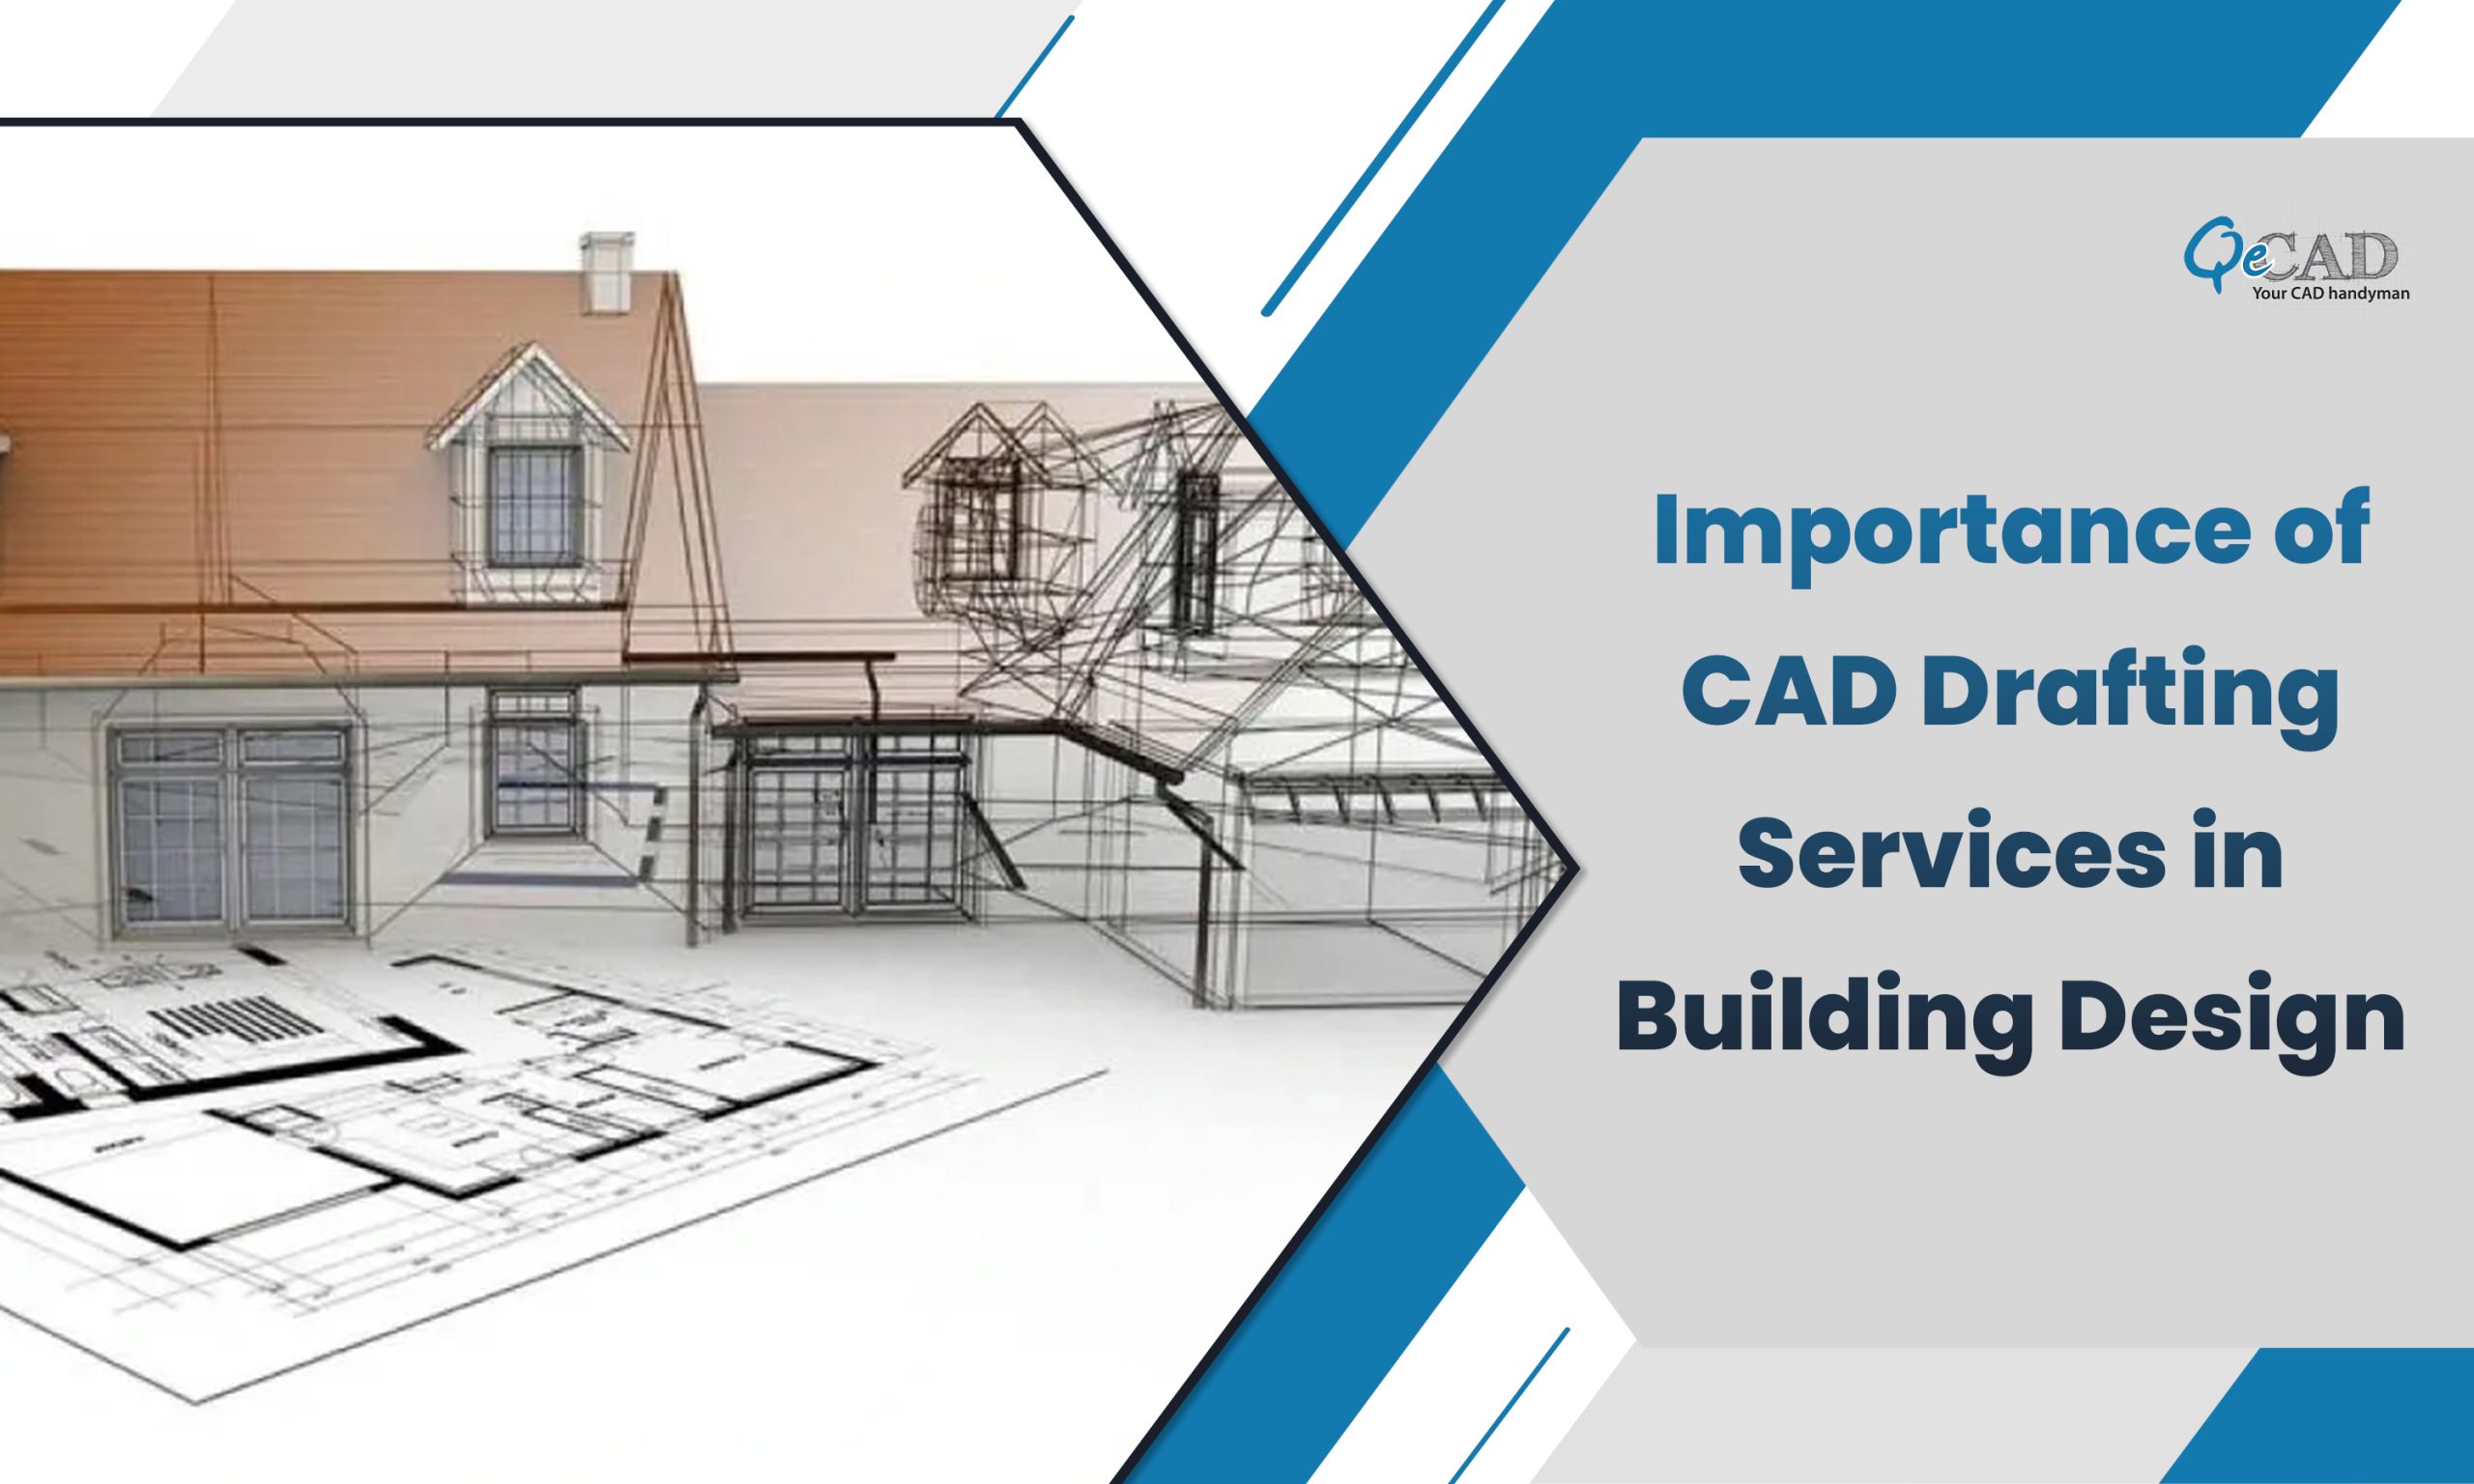 CAD Drafting Services in Building Design